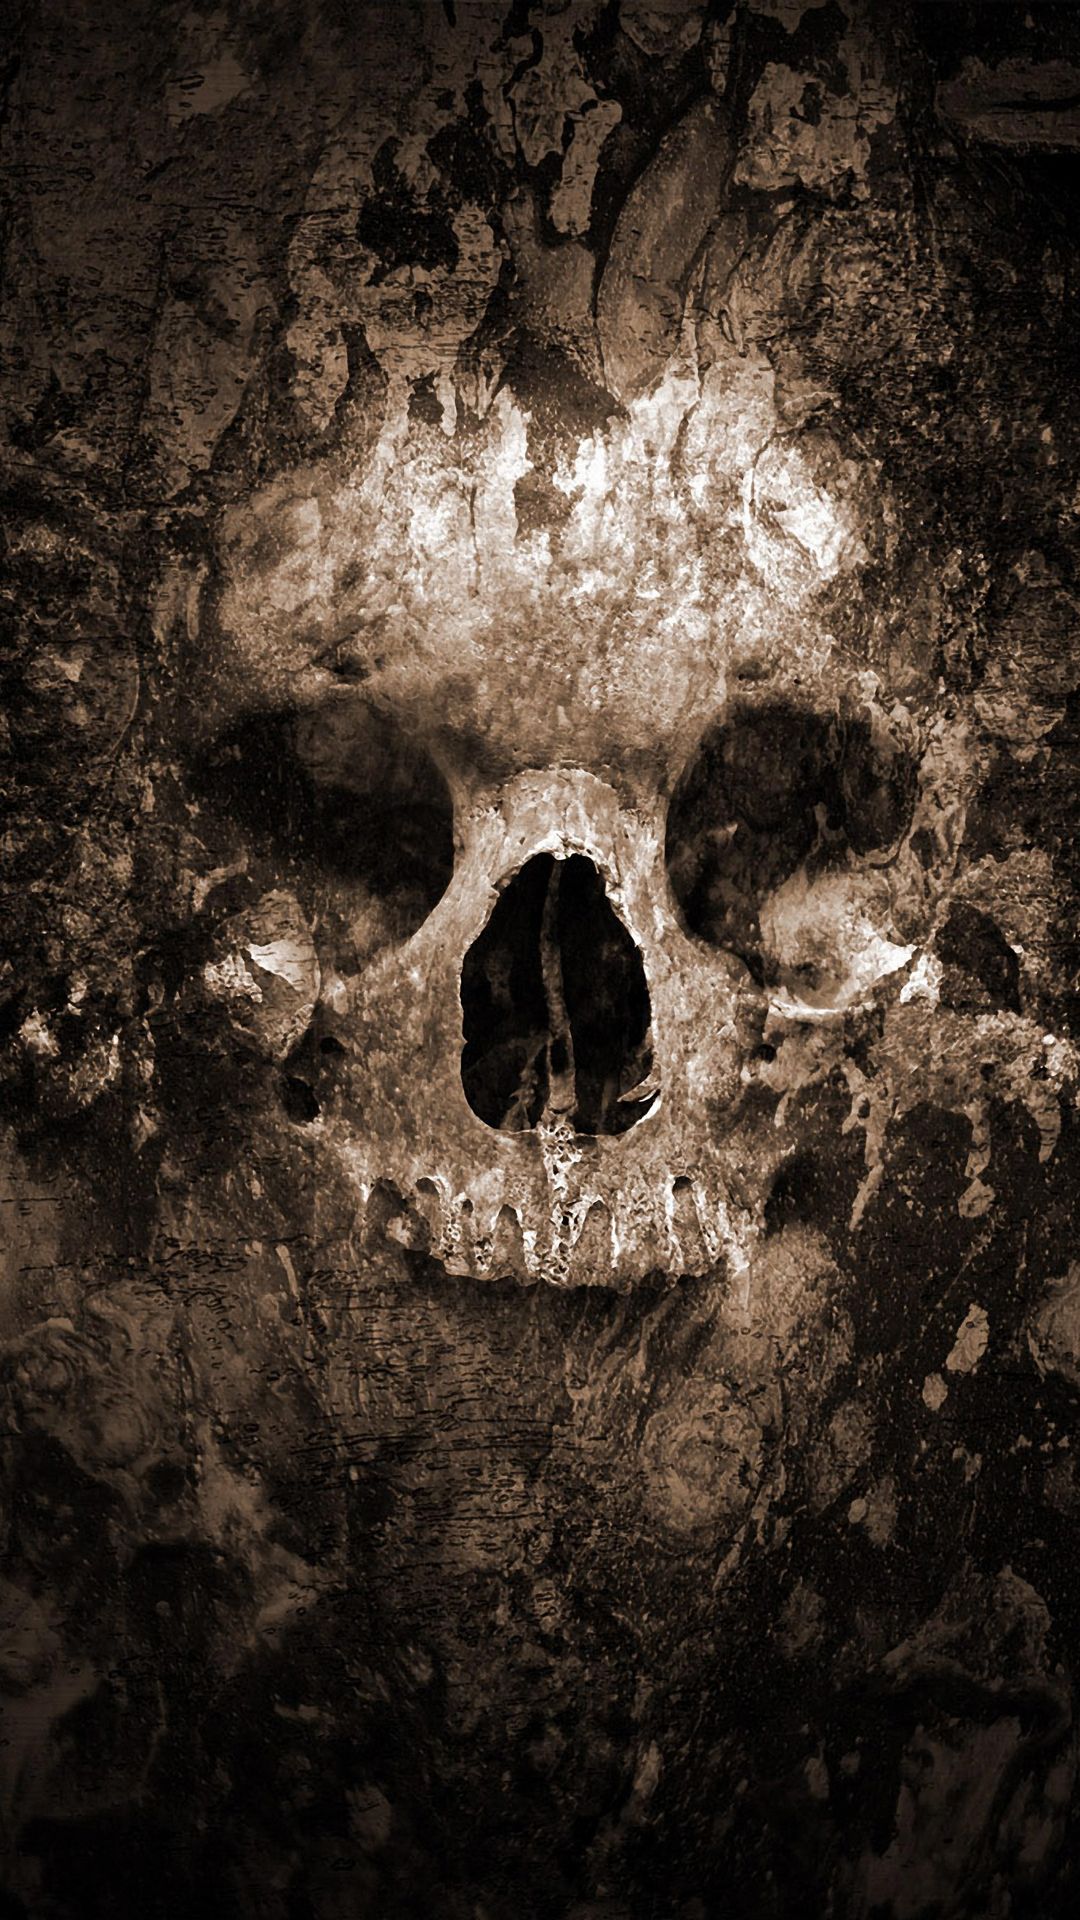 Skull Halloween htc one wallpaper, free and easy to download